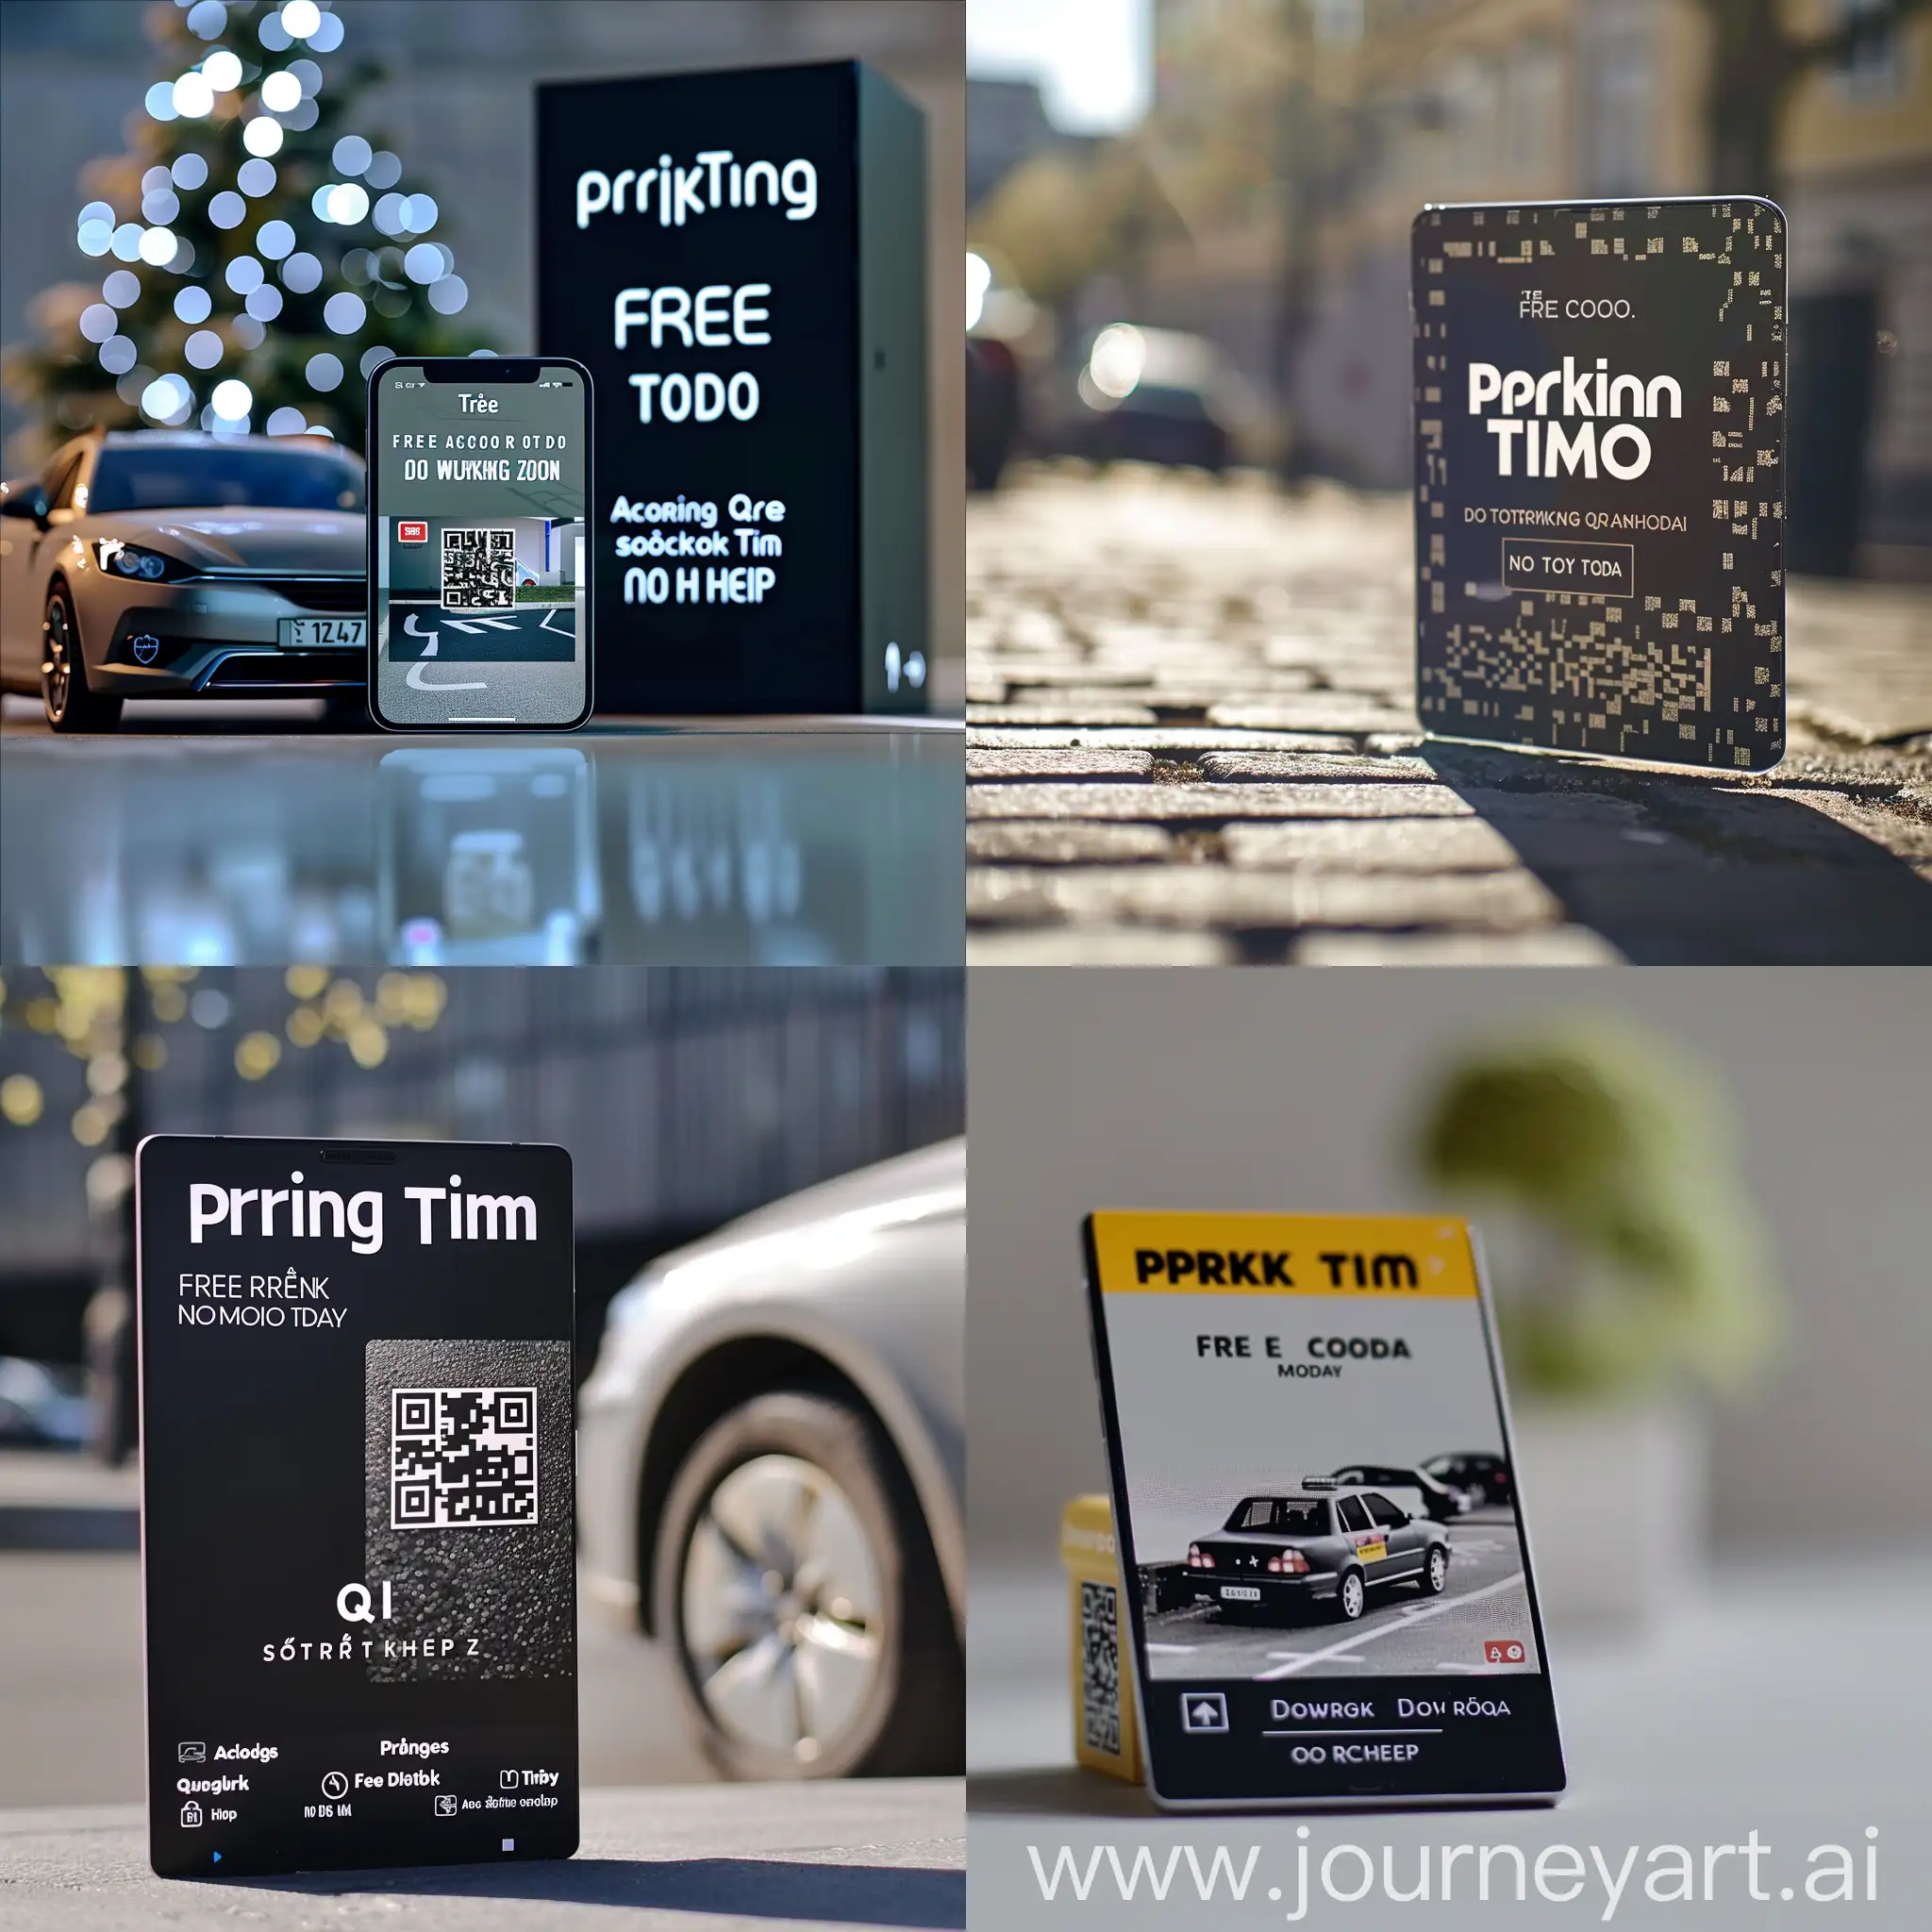 make a marketing design photo for "parking time" free parking app with this information FREE PARKING DISC ON MOBILE NO ACCOUNT REQUIRED DOWNLOAD TODAY QR CODE PARKING ZONE "stortorget" INFO HOMEPAGE SOCIAL MEDIA QUESTIONS OR HELP